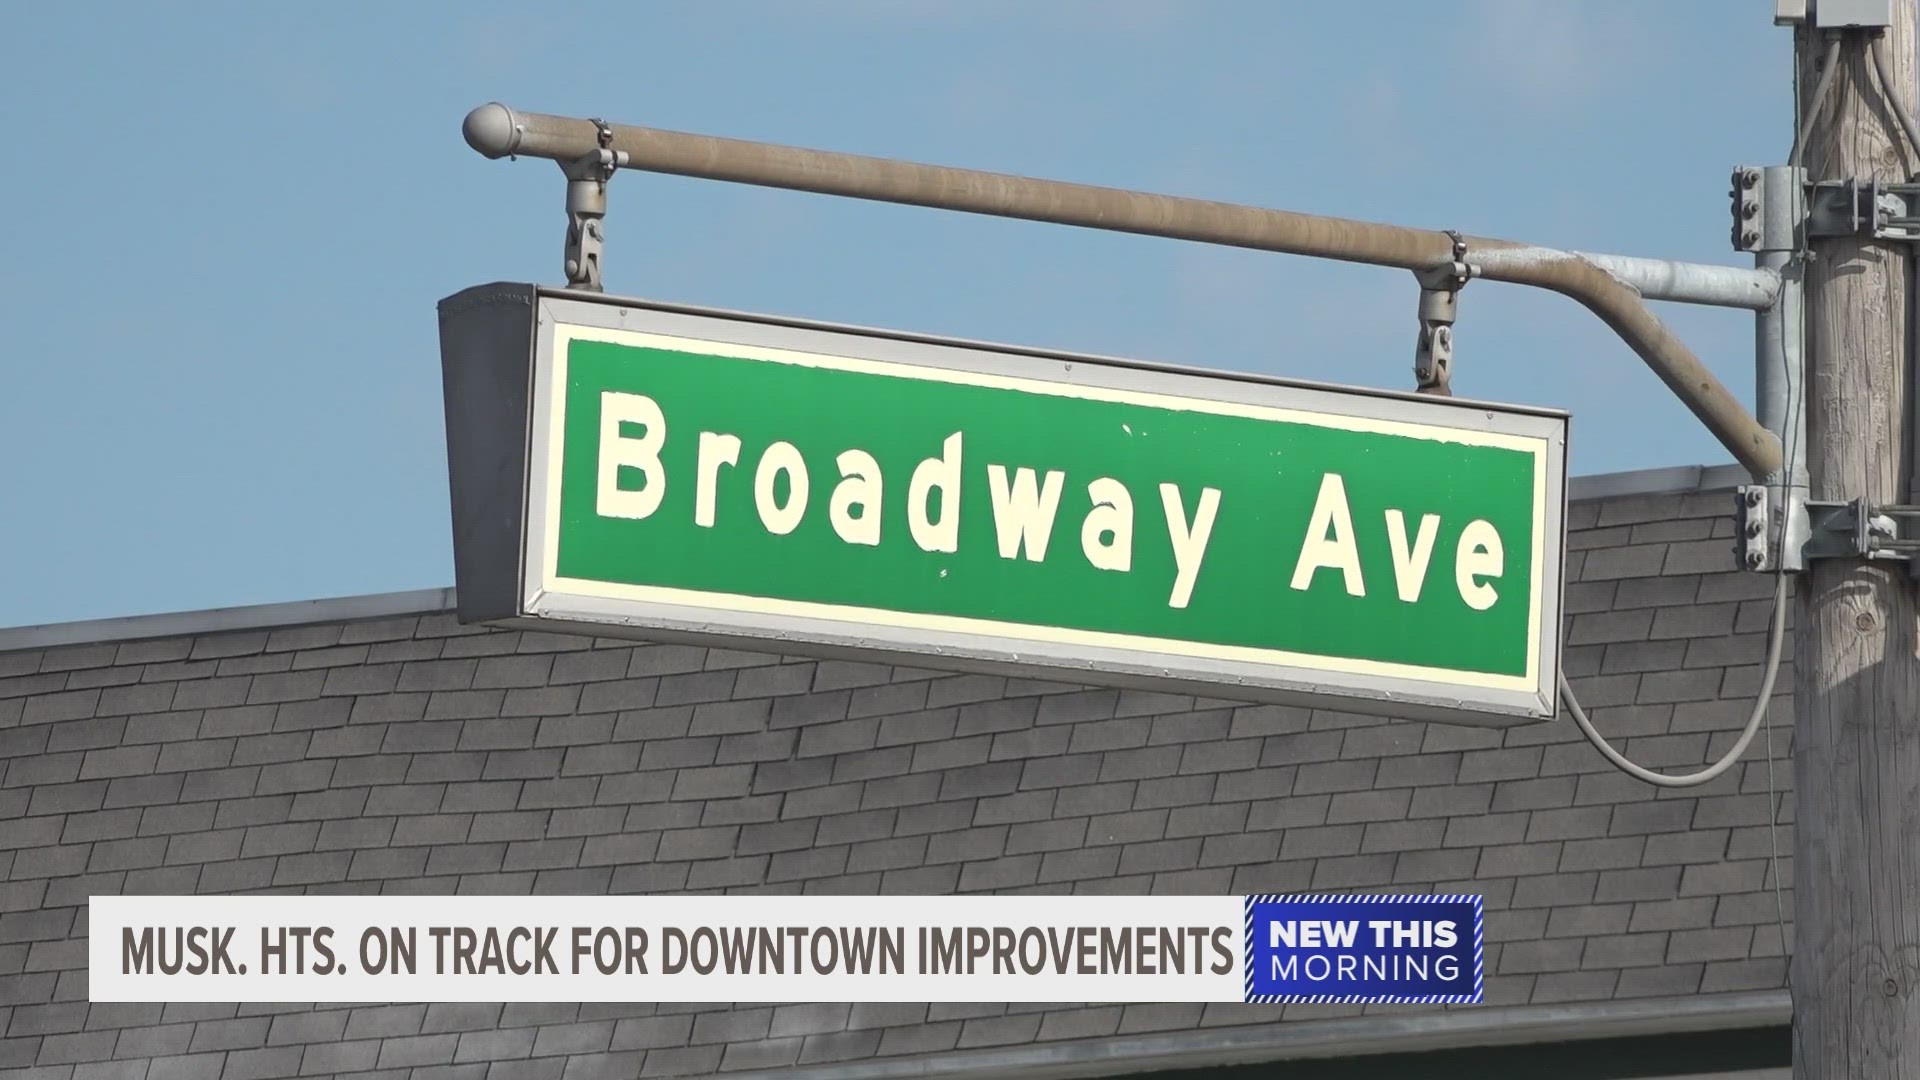 The almost 2-mile stretch of roadway that runs through the city’s downtown is expected to help drive investment to an area that some might perceive as forgotten.